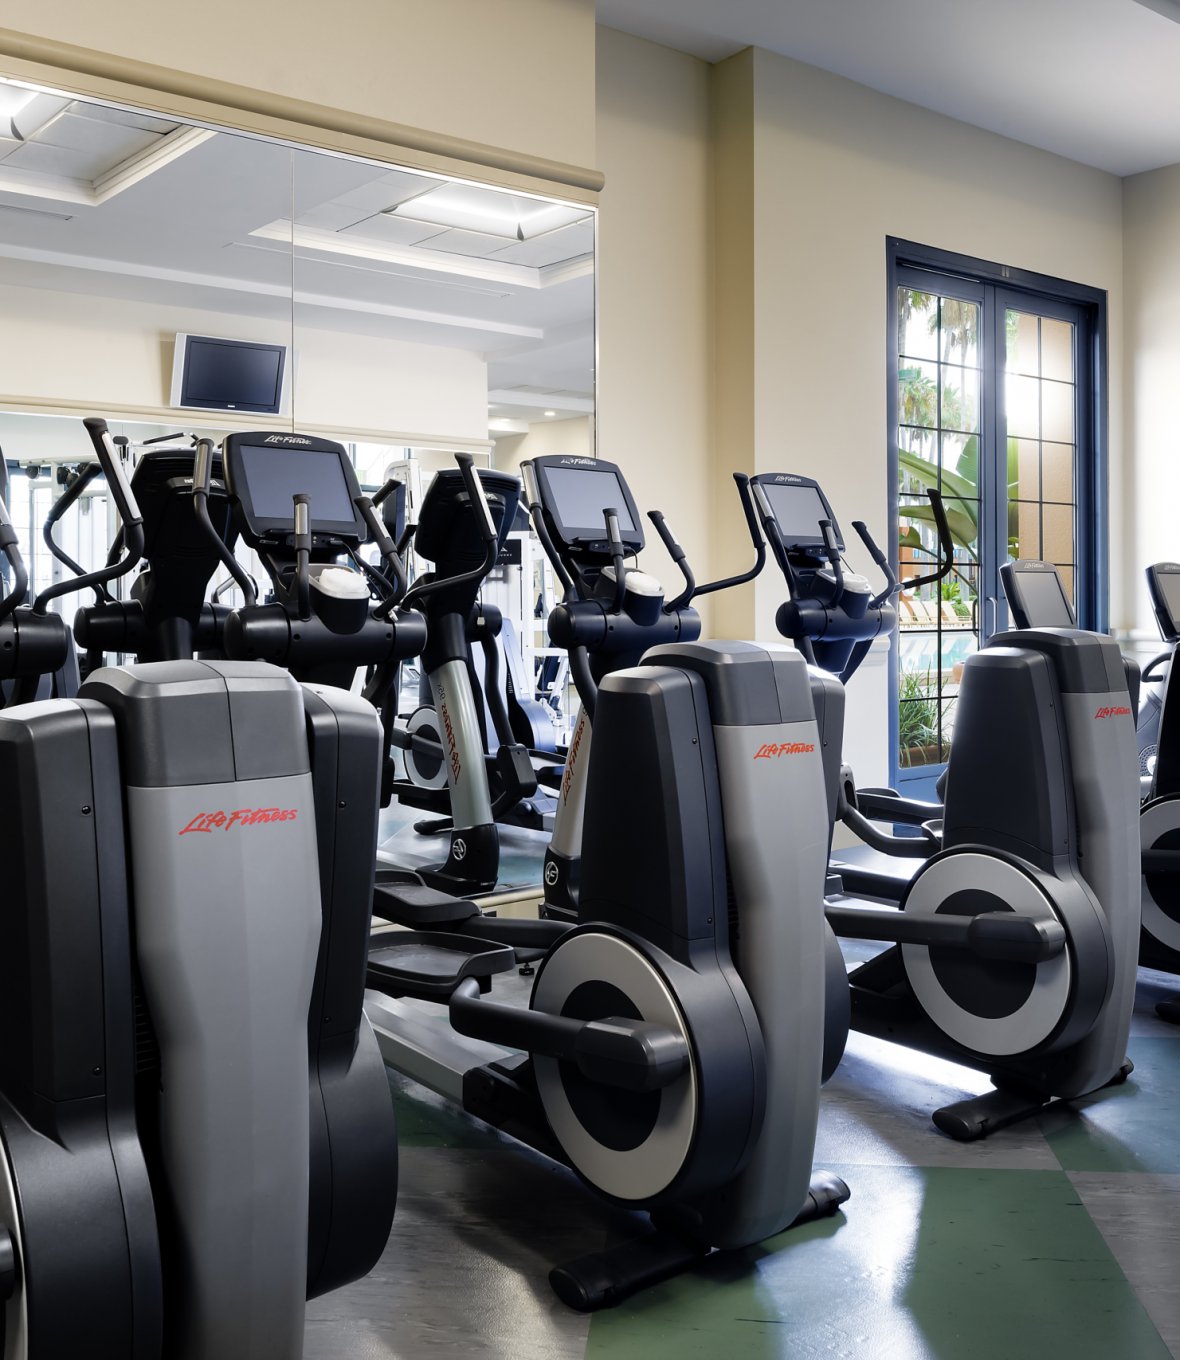 Exercise Machines in the Swan Health Club